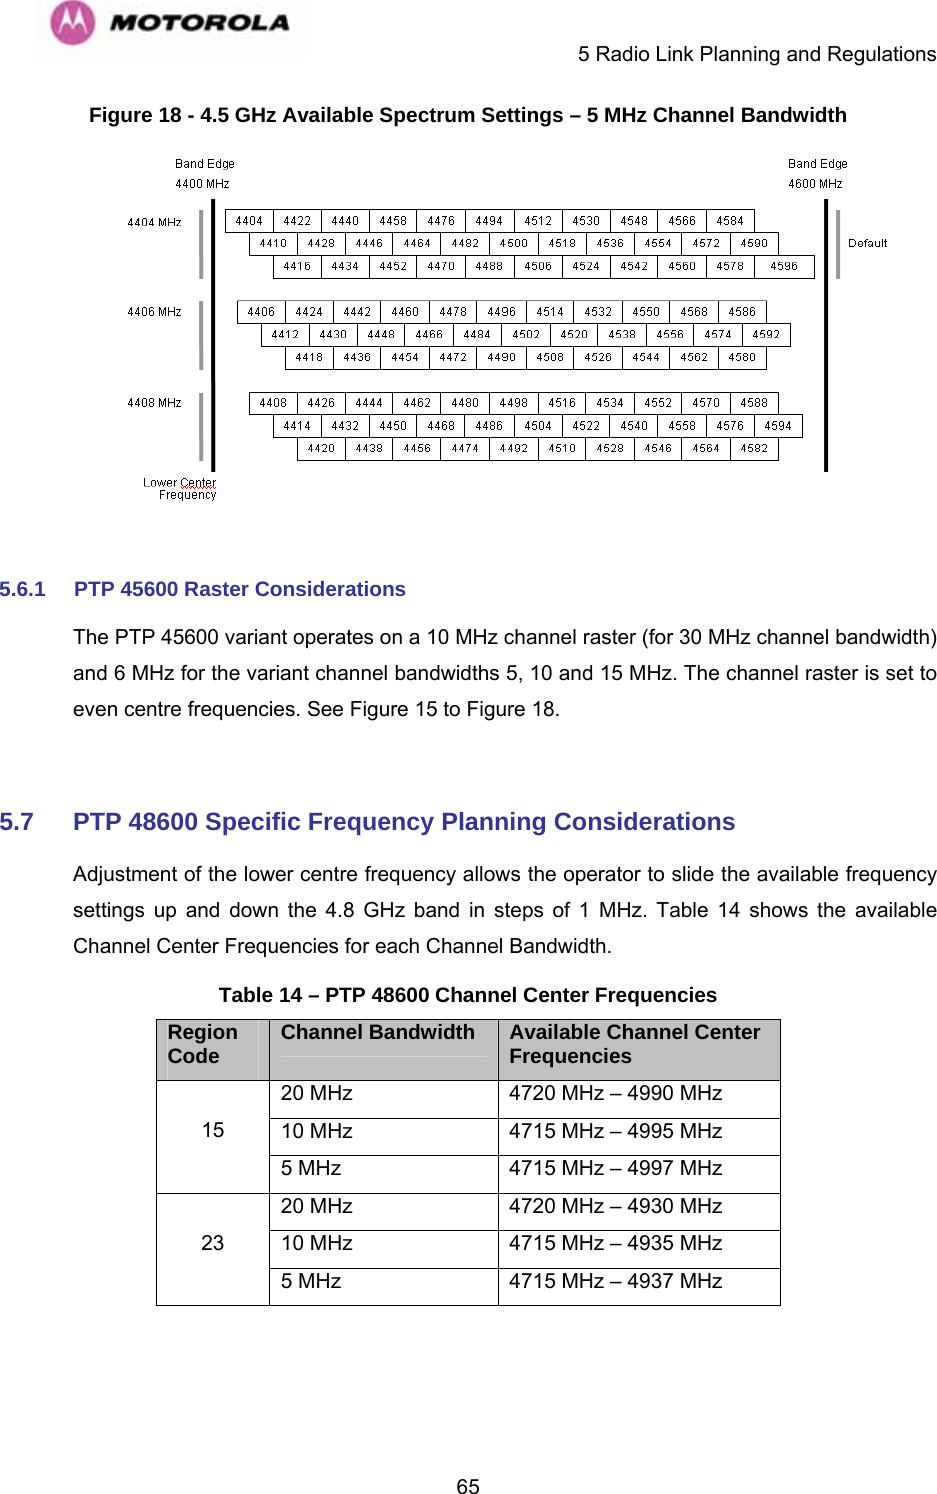     5 Radio Link Planning and Regulations  65Figure 18 - 4.5 GHz Available Spectrum Settings – 5 MHz Channel Bandwidth   5.6.1  PTP 45600 Raster Considerations The PTP 45600 variant operates on a 10 MHz channel raster (for 30 MHz channel bandwidth) and 6 MHz for the variant channel bandwidths 5, 10 and 15 MHz. The channel raster is set to even centre frequencies. See Figure 15 to Figure 18.  5.7  PTP 48600 Specific Frequency Planning Considerations Adjustment of the lower centre frequency allows the operator to slide the available frequency settings up and down the 4.8 GHz band in steps of 1 MHz. Table 14 shows the available Channel Center Frequencies for each Channel Bandwidth. Table 14 – PTP 48600 Channel Center Frequencies Region Code  Channel Bandwidth  Available Channel Center Frequencies 20 MHz  4720 MHz – 4990 MHz 10 MHz  4715 MHz – 4995 MHz 15 5 MHz  4715 MHz – 4997 MHz 20 MHz  4720 MHz – 4930 MHz 10 MHz  4715 MHz – 4935 MHz 23 5 MHz  4715 MHz – 4937 MHz 